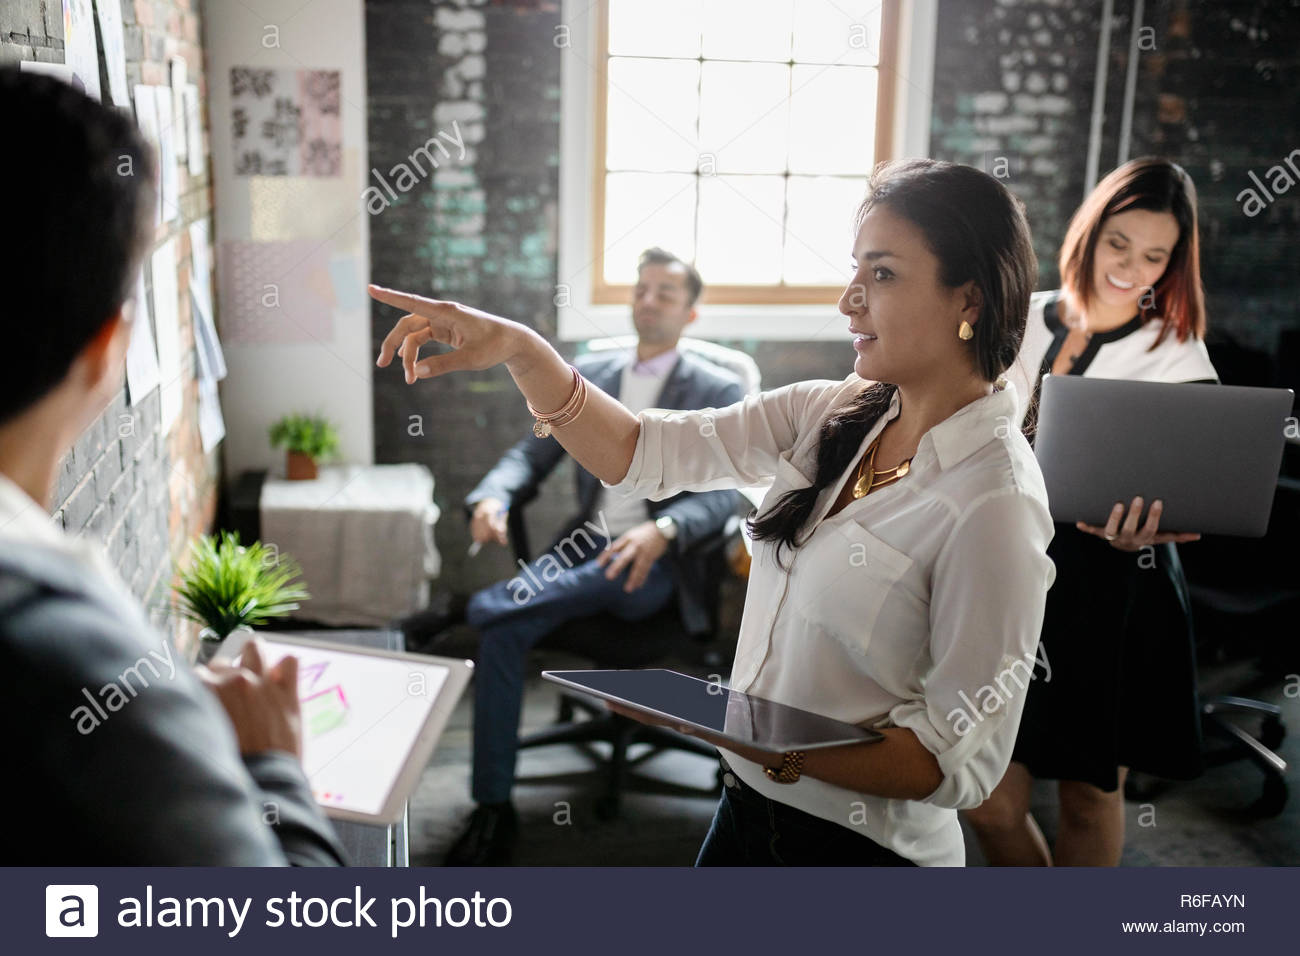 Creative business people brainstorming in office meeting Stock Photo